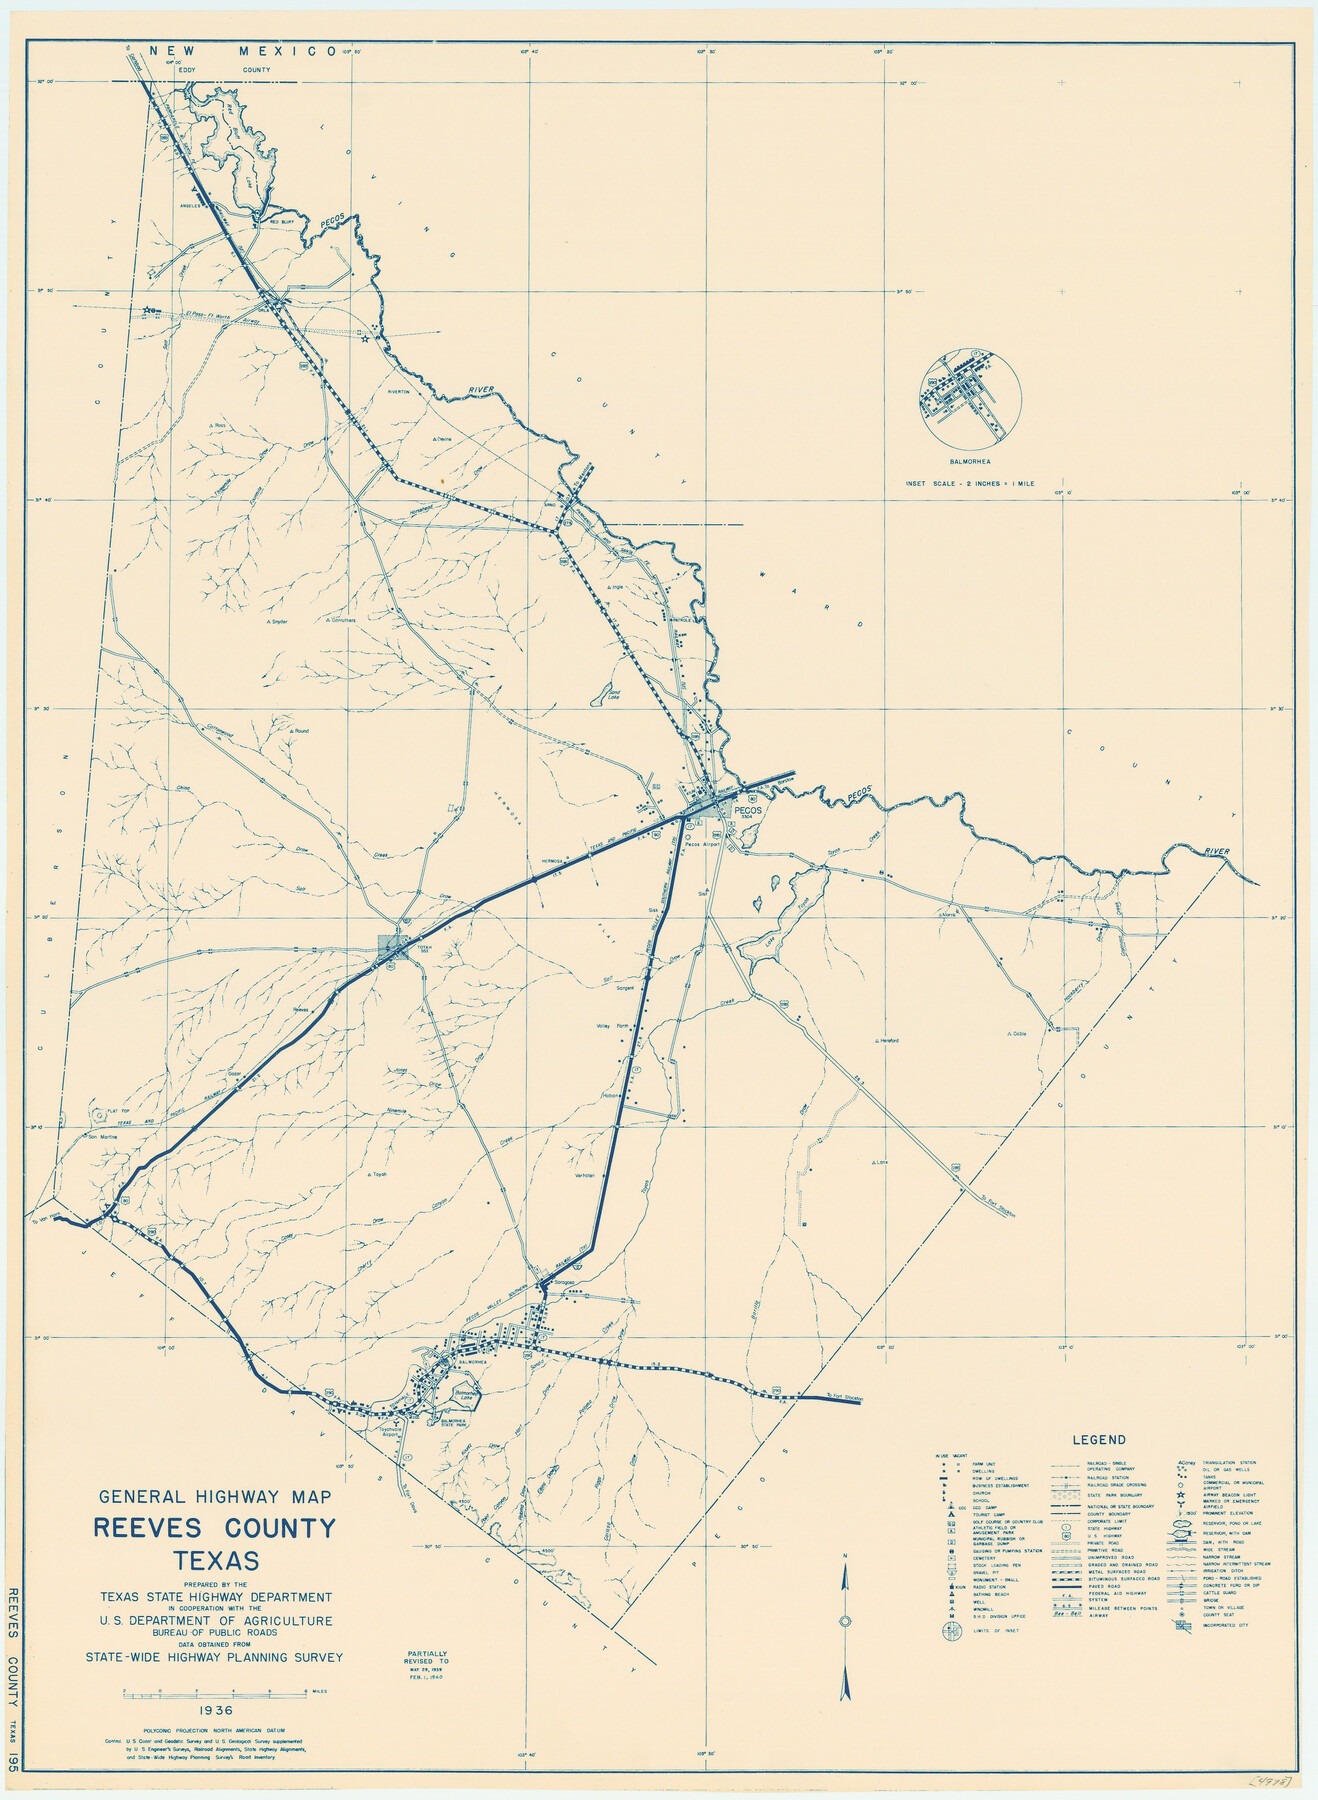 79227, General Highway Map, Reeves County, Texas, Texas State Library and Archives